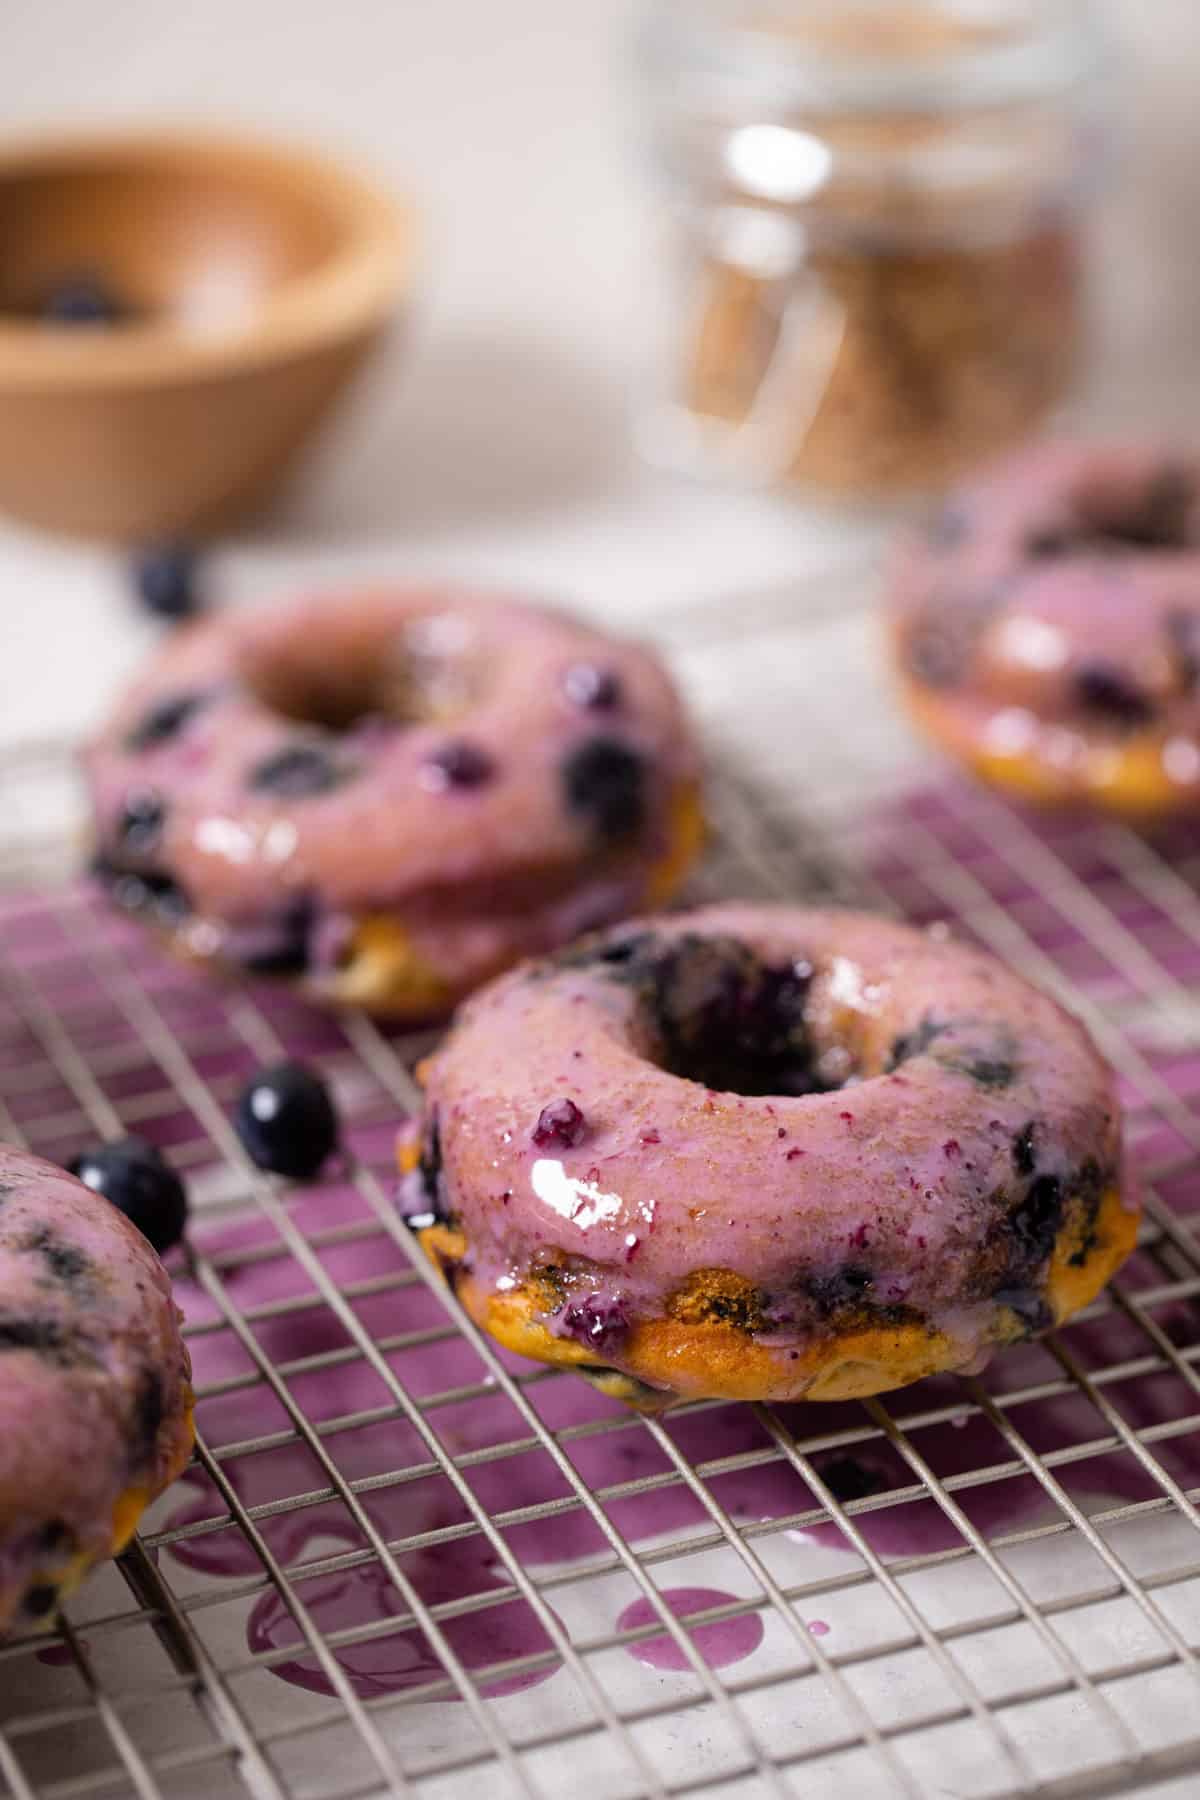 Doughnuts on a cooling rack.